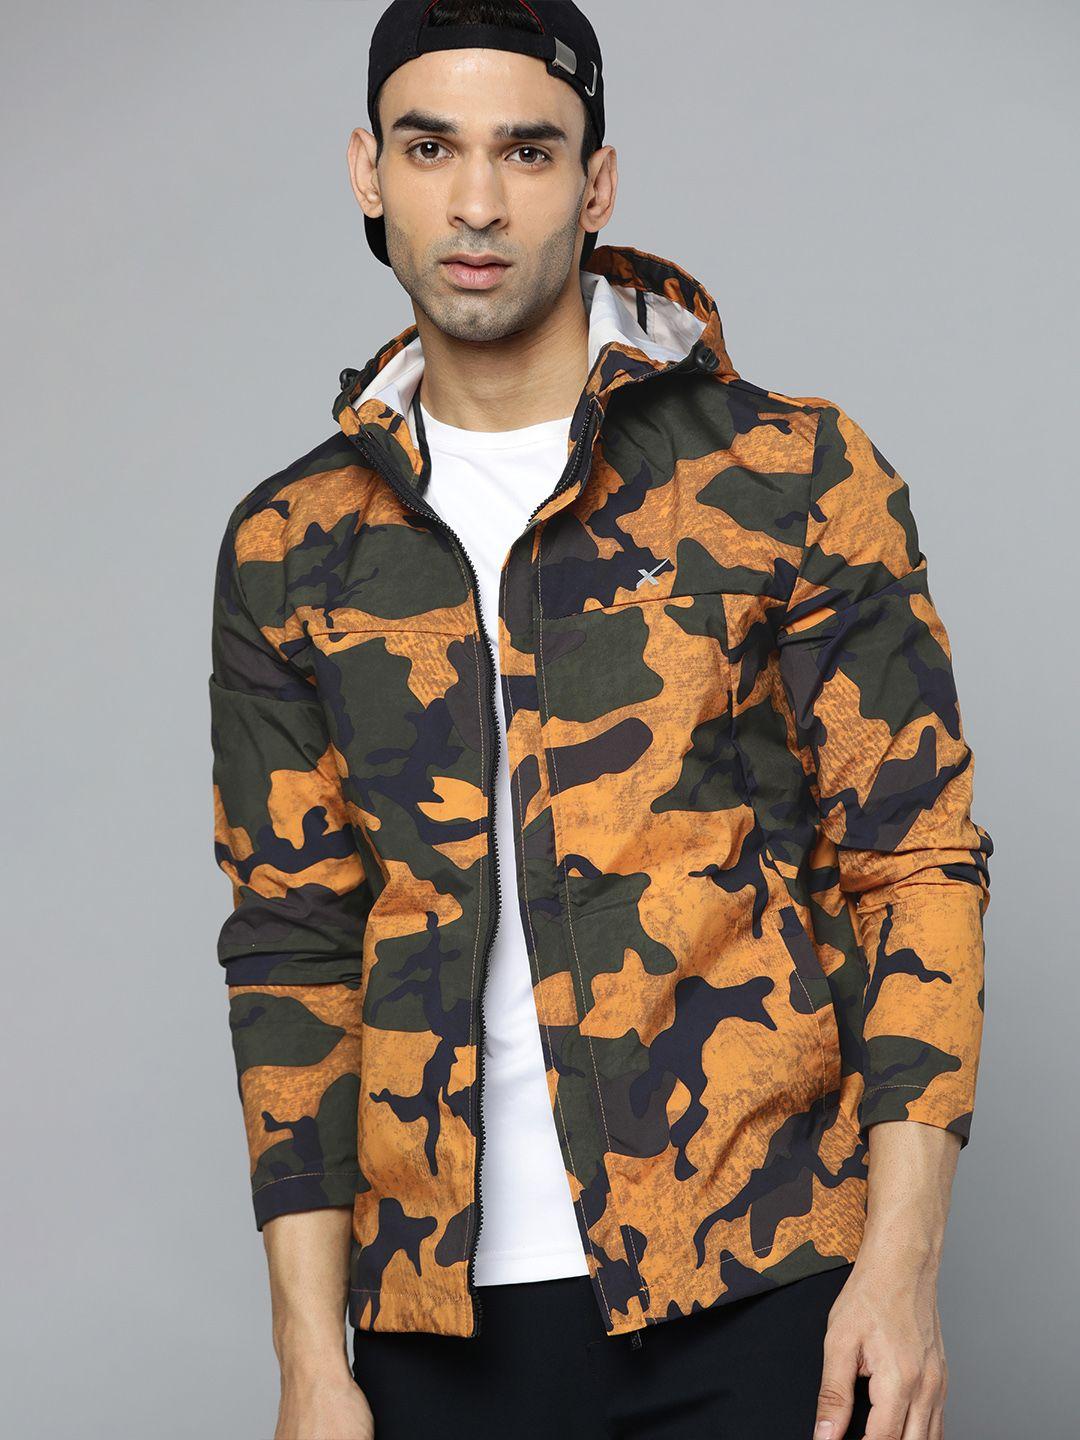 hrx by hrithik roshan outdoor men designer to comment rapid-dry camouflage jackets